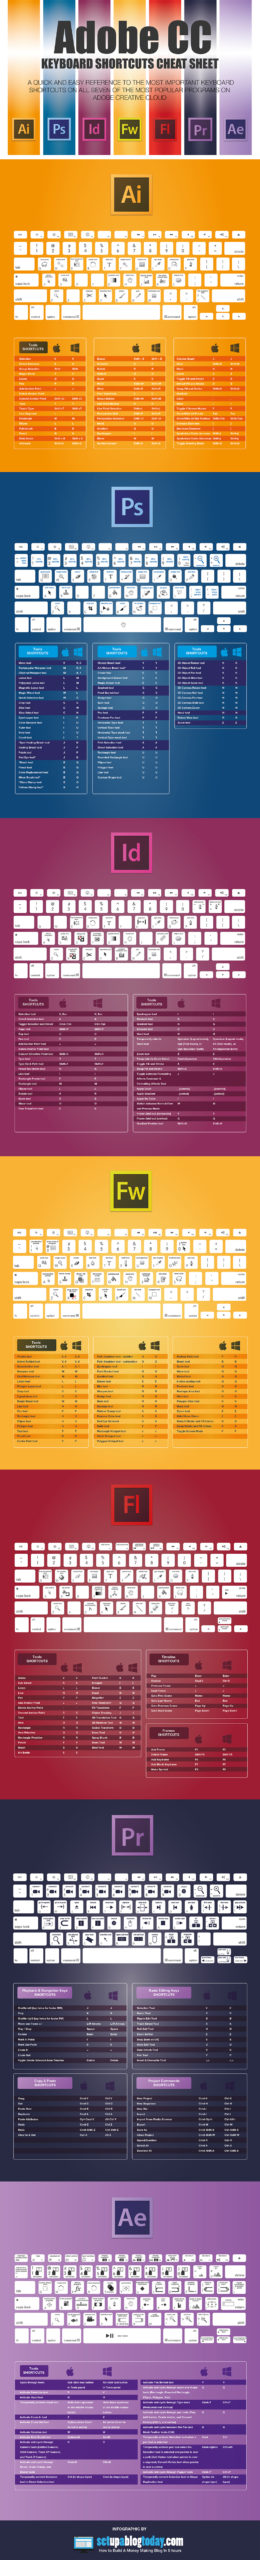 Learn All The Keyboard Shortcuts For Adobe Apps With This Cheat Sheet